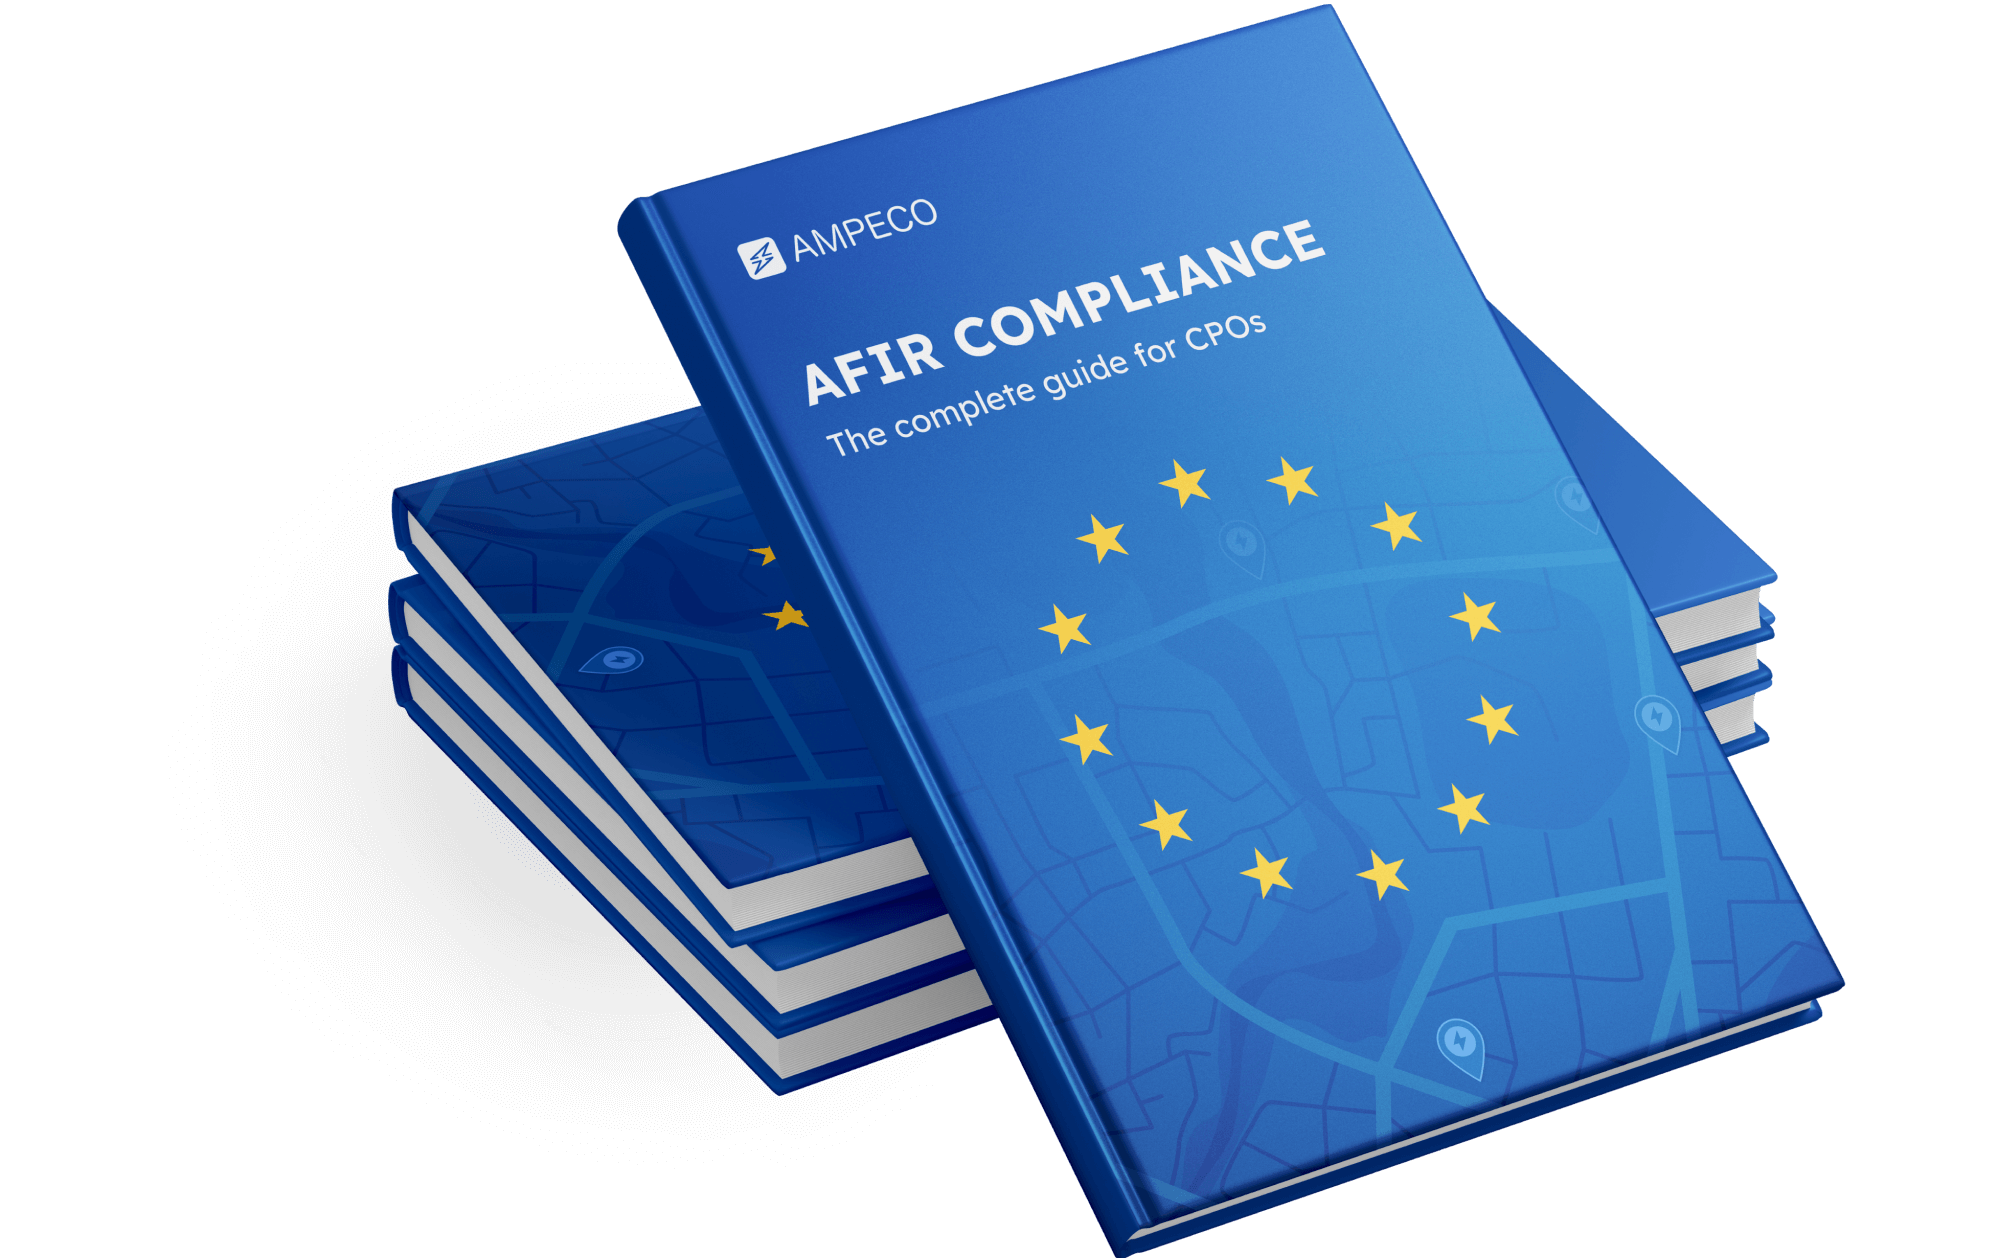 The Complete Guide to AFIR Compliance for CPOs - Charge Point Operators face new regulatory challenges under AFIR. Understanding the requirements and the available solutions is crucial to selecting the most cost-effective and timely path to compliance.